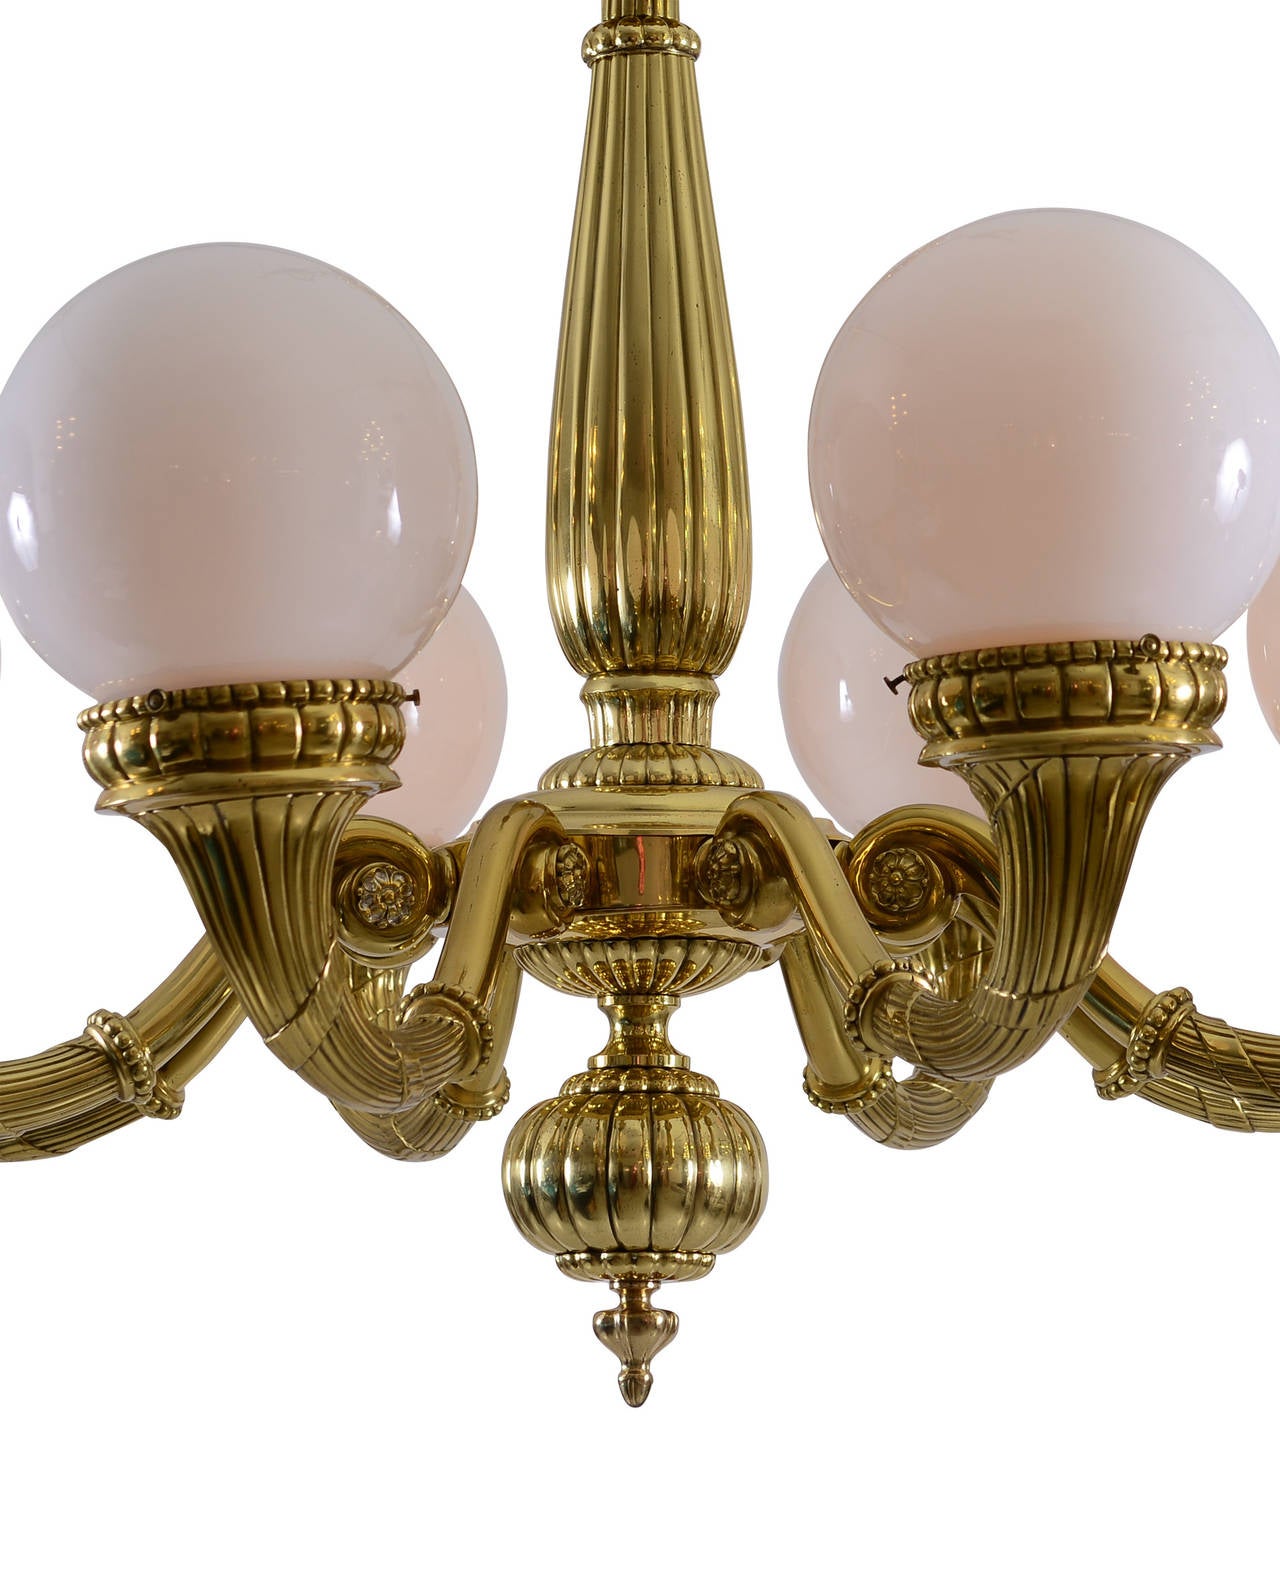 Early 20th Century Casted chased brass Classizistic-Art nouveau Chandelier, 20th Century- Original 